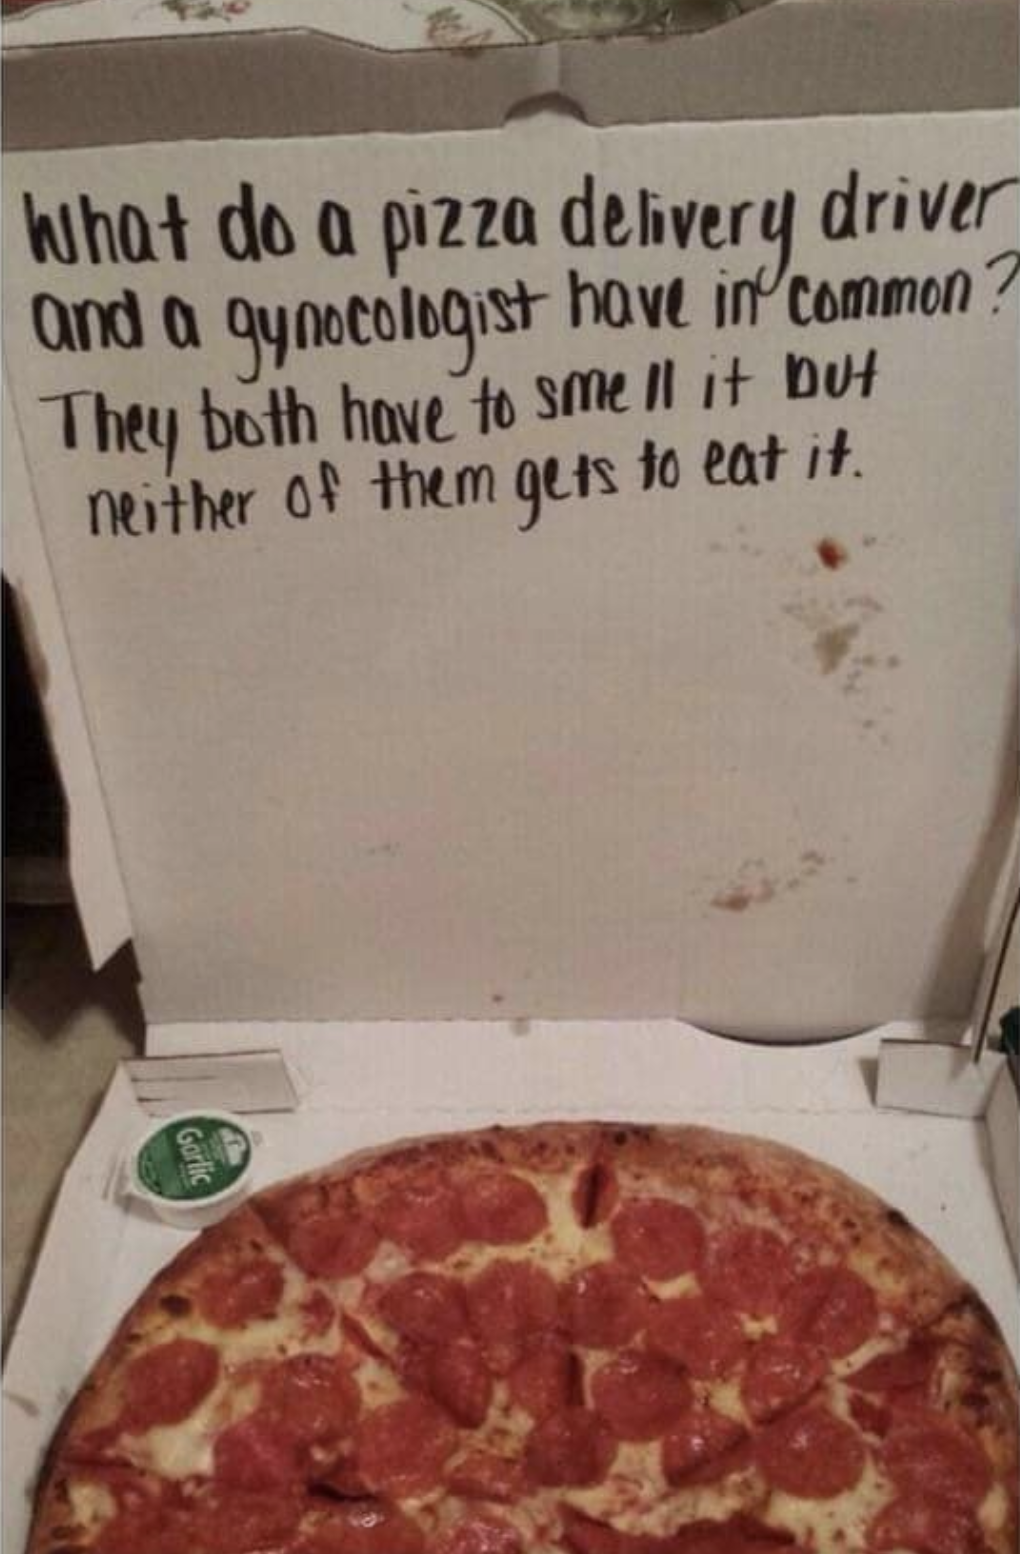 Papa Johns was asked to write a joke on the pizza...